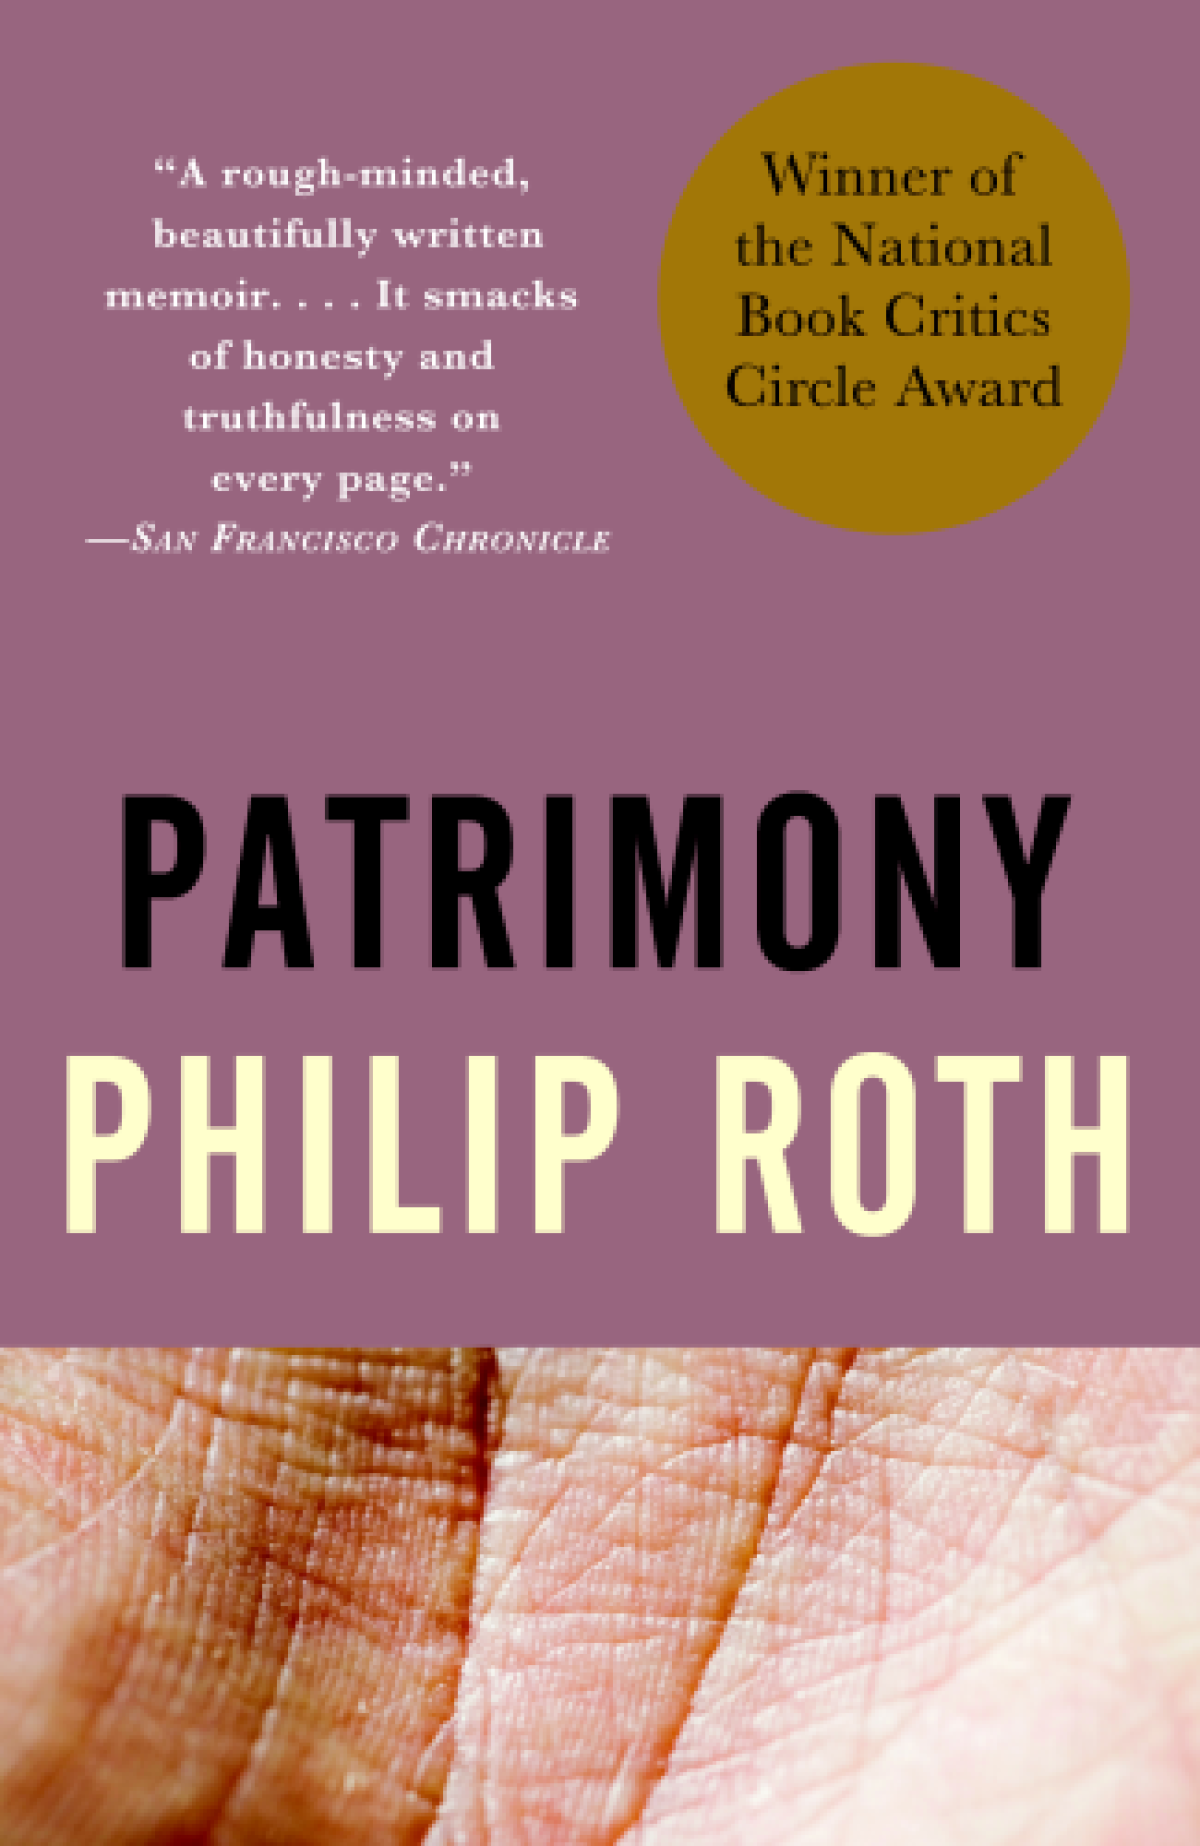 "Patrimony," by Philip Roth.